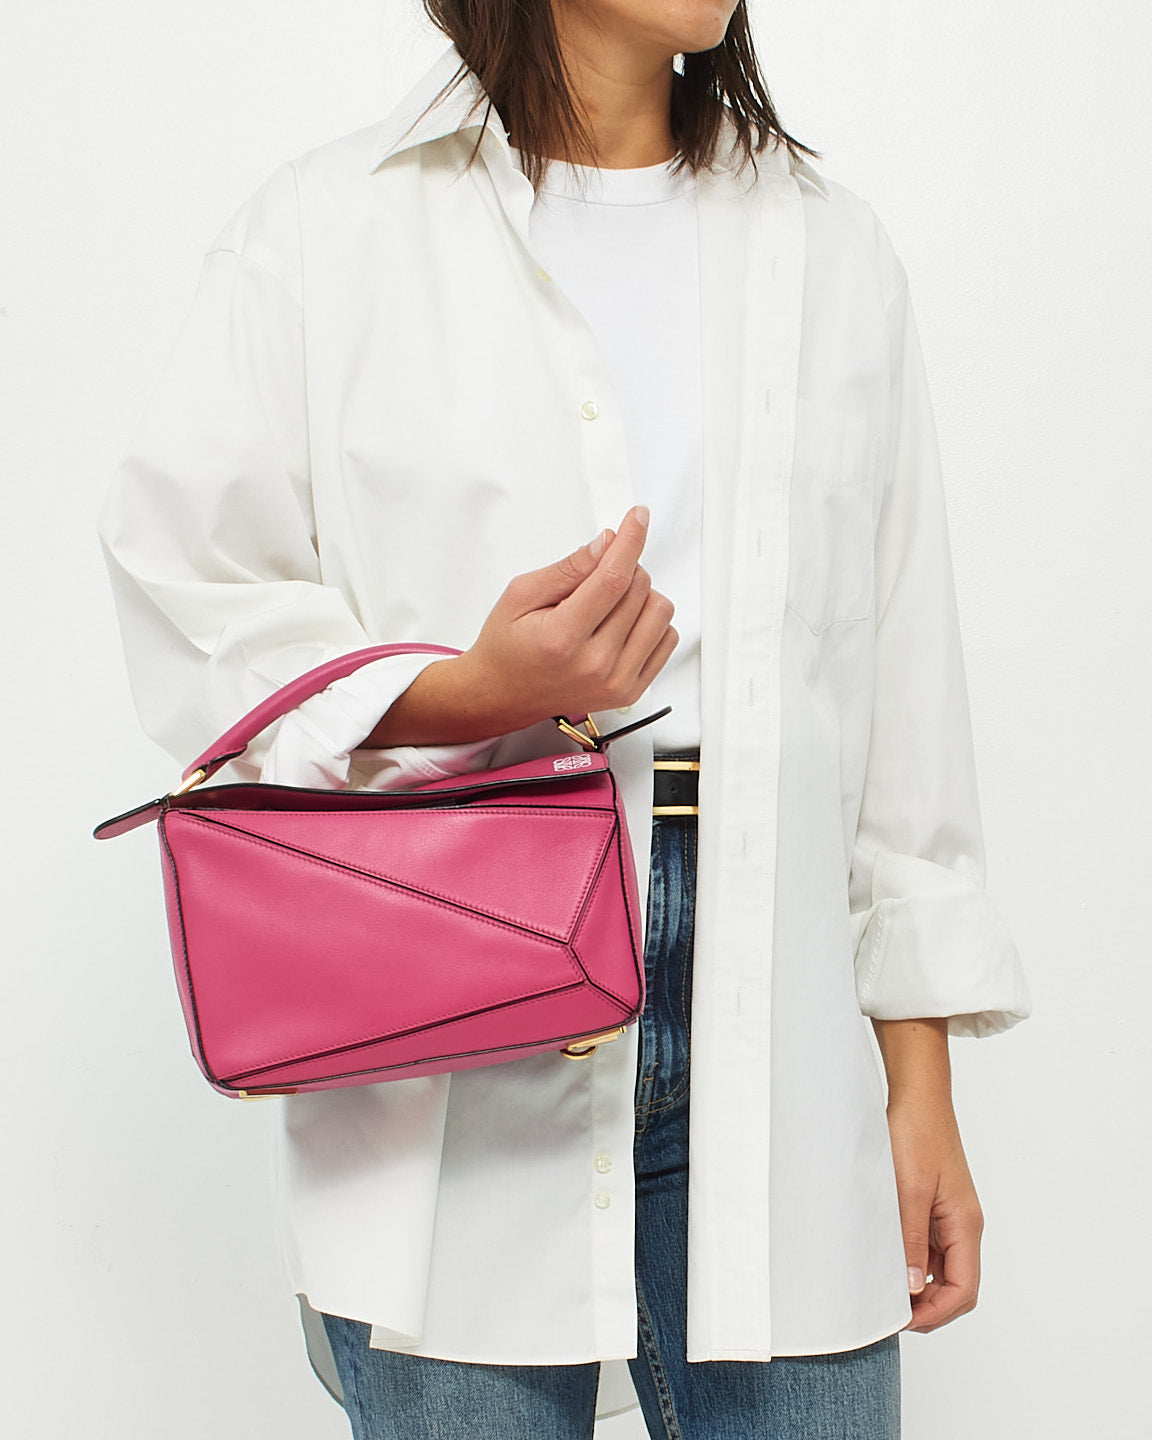 Loewe Pink Fuchsia Leather Small Puzzle Bag